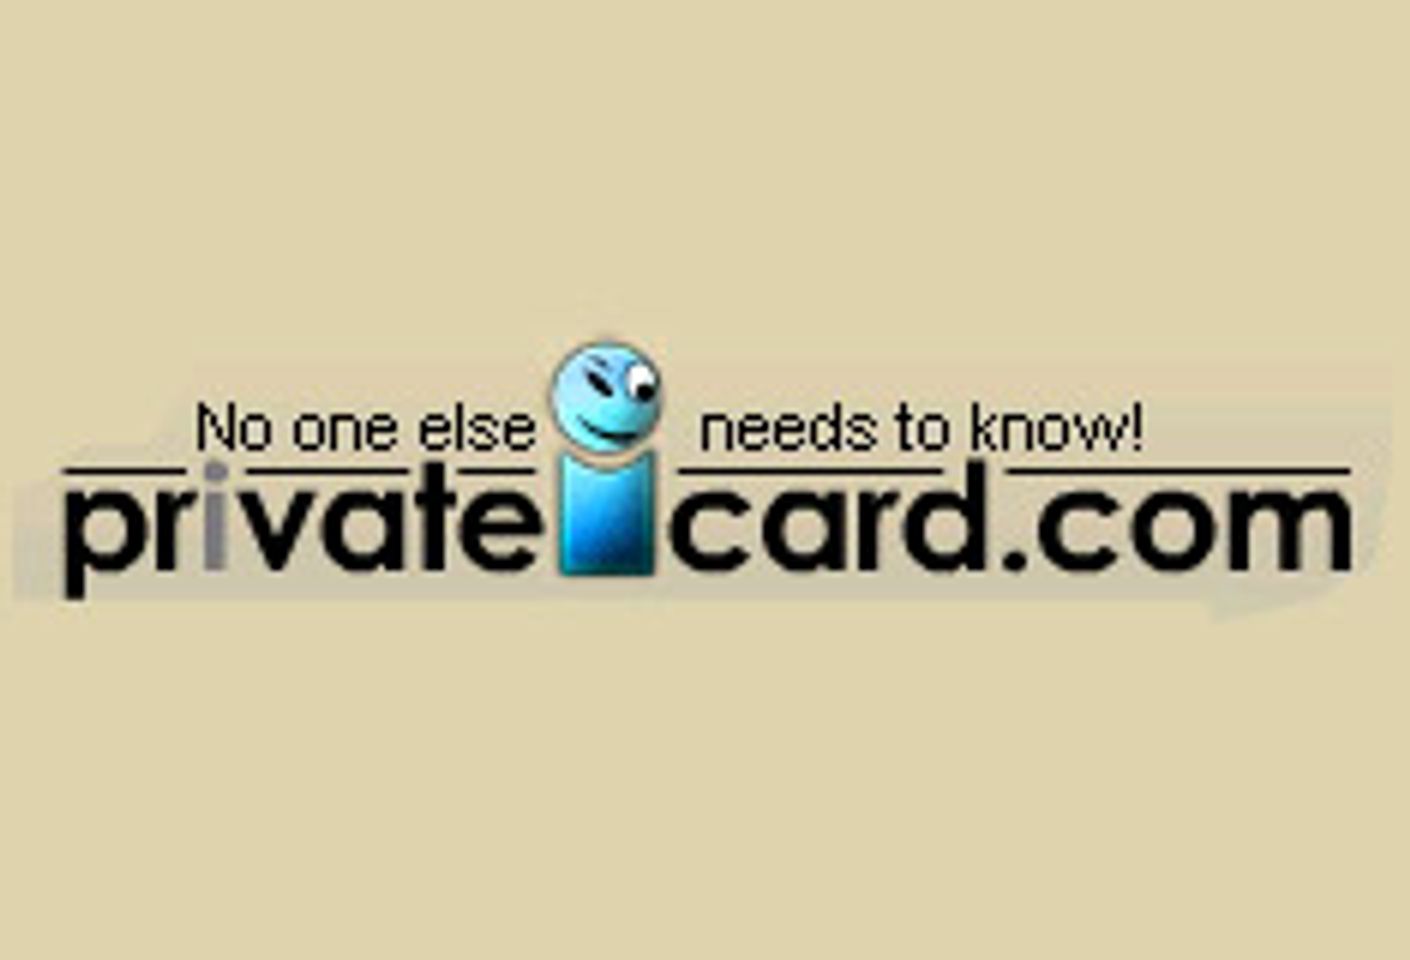 Another Way To Shop in Privacy: privateIcard